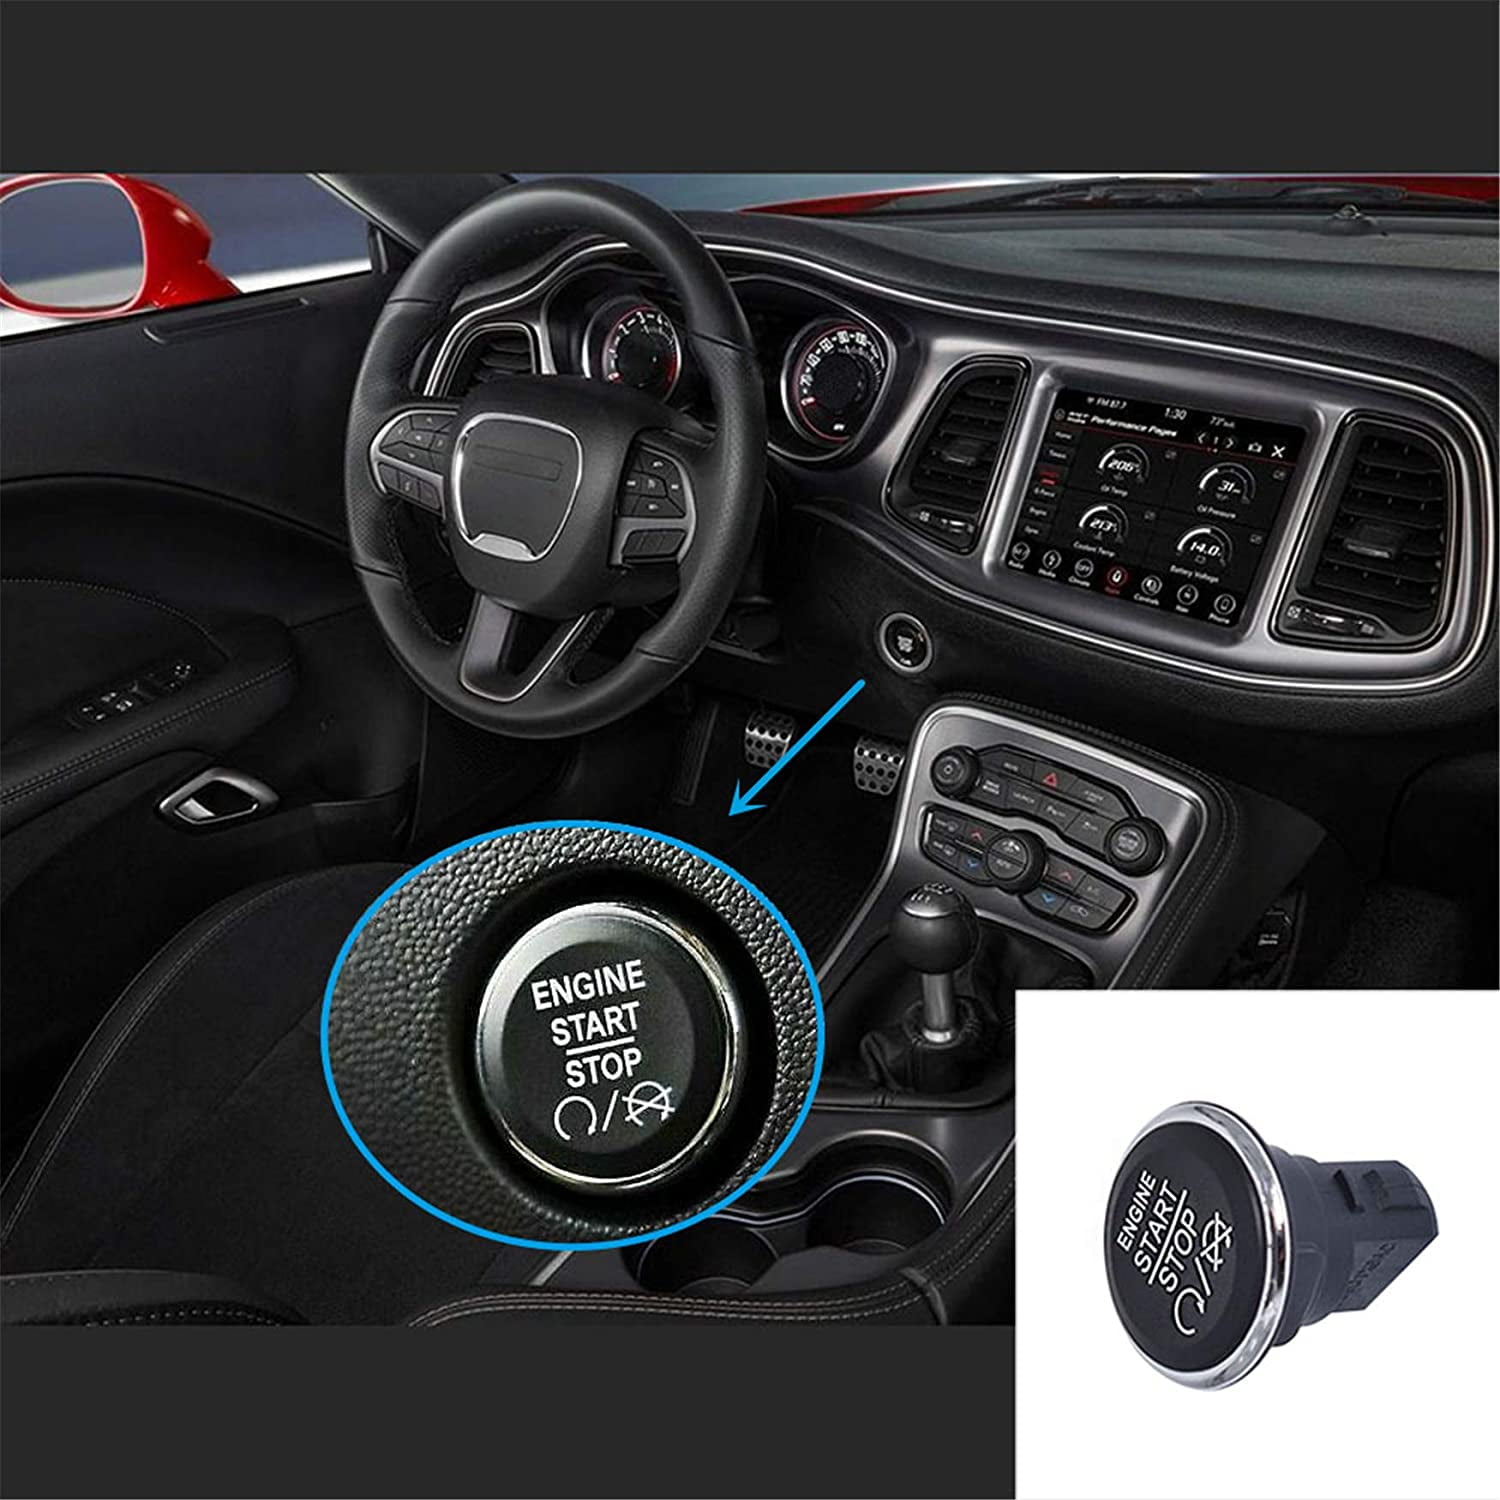 WFLNHB Keyless Go Push To Start Stop Engine Dash Ignition Button Switch Replacement for Chrysler Dodge Commander Grand Cherokee 1FU931X9AC 1FU931X9AB 33370101